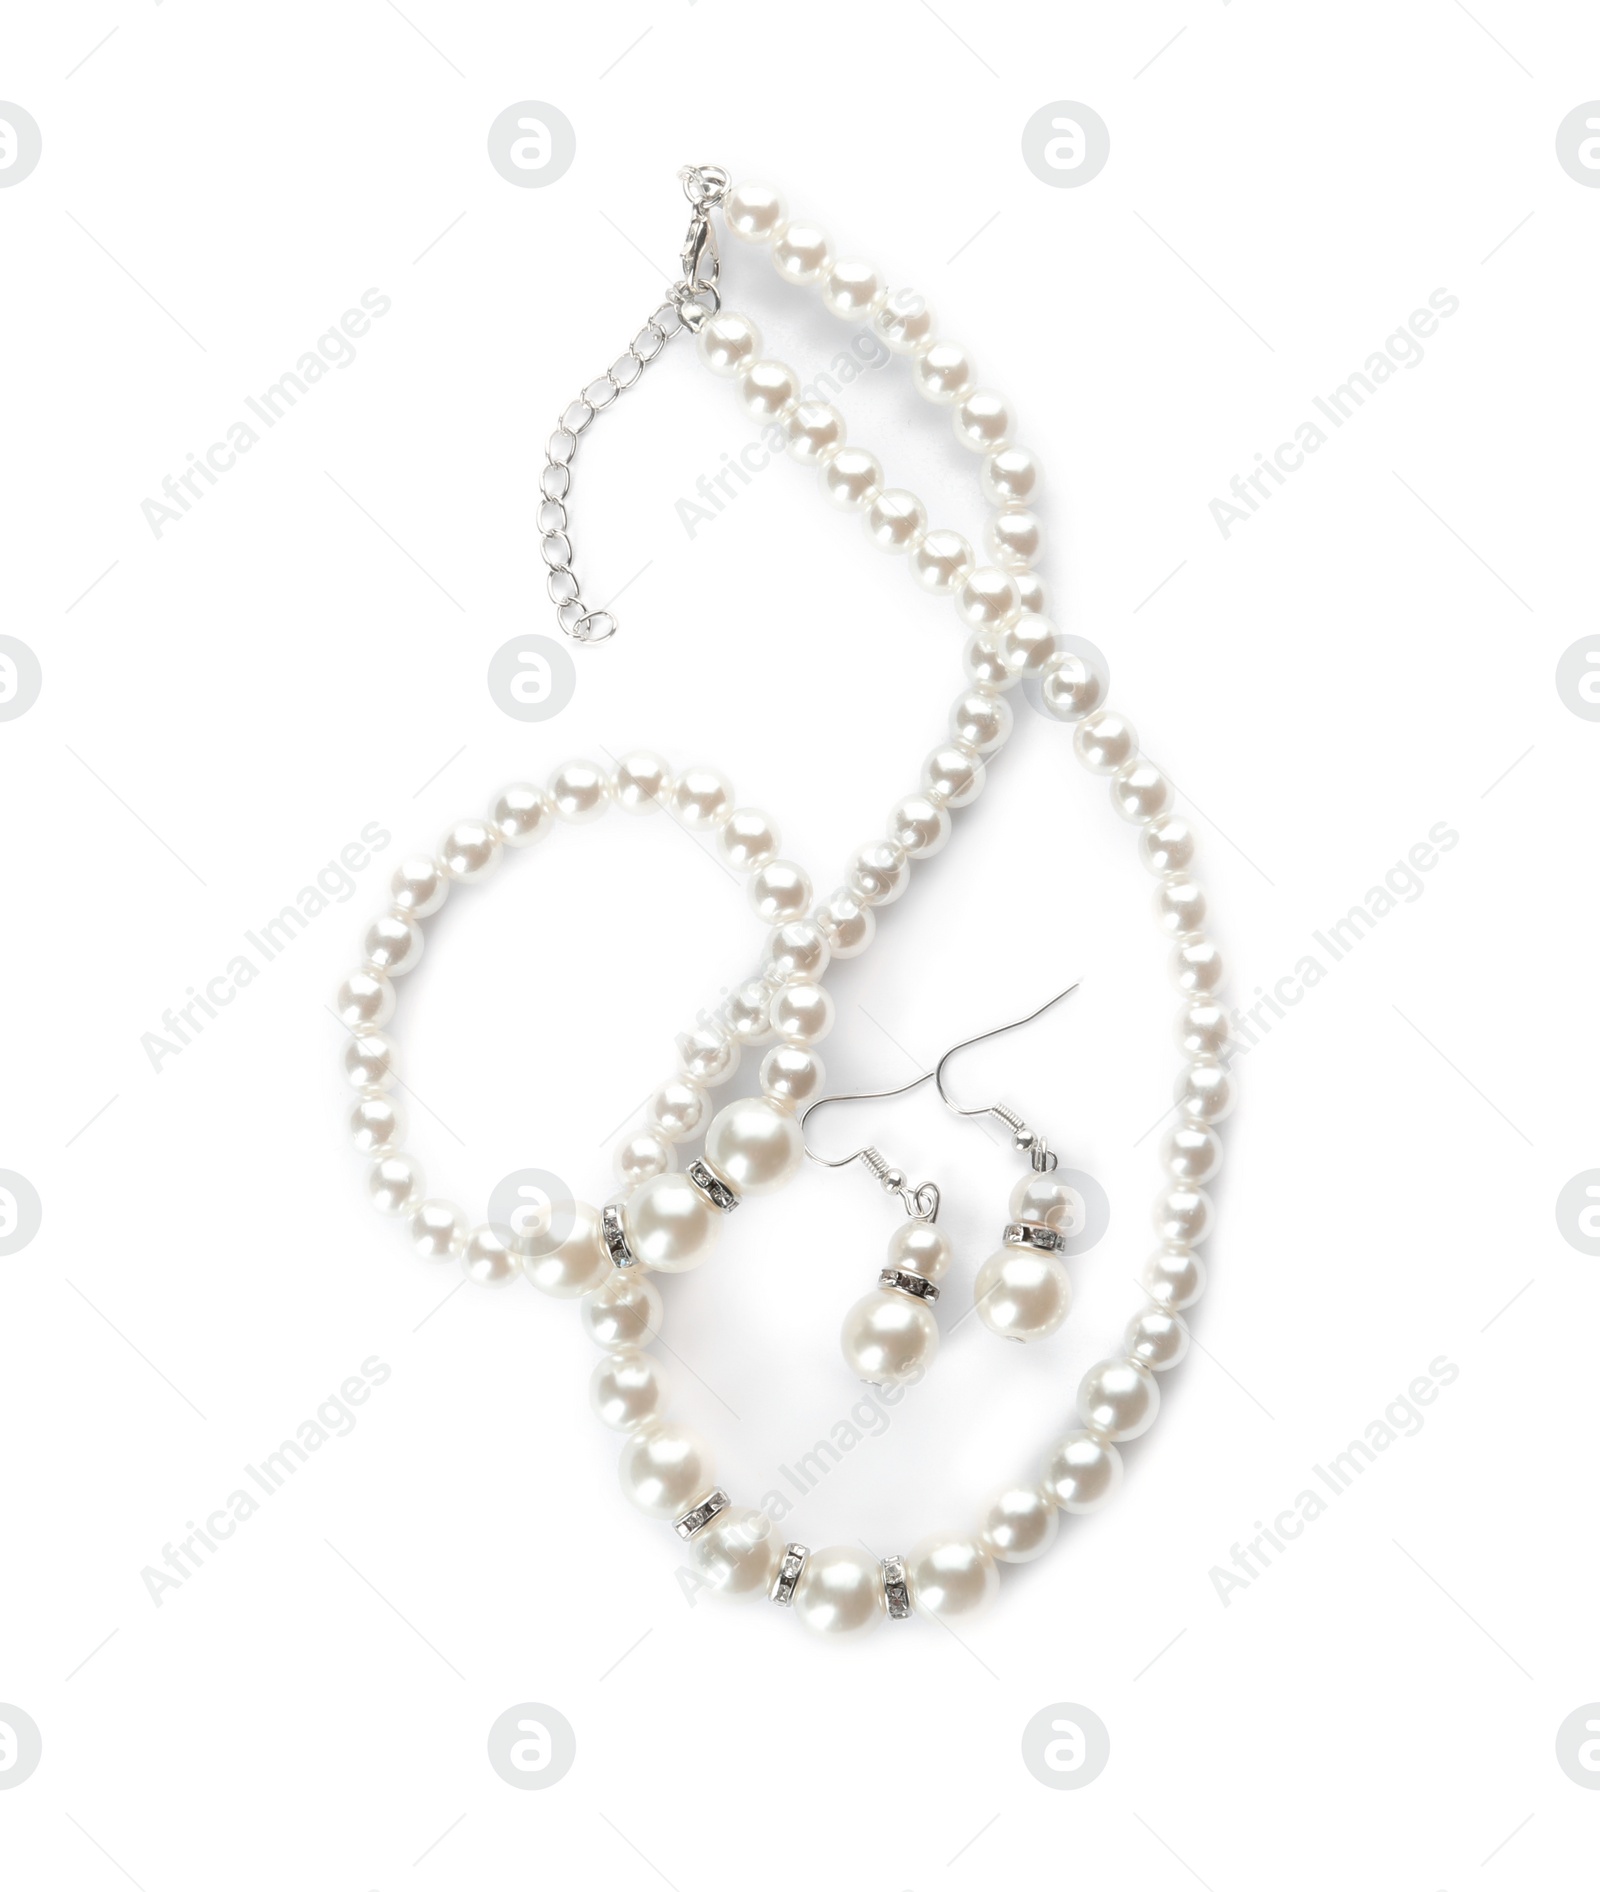 Photo of Elegant pearl necklace, bracelet and earrings on white background, top view